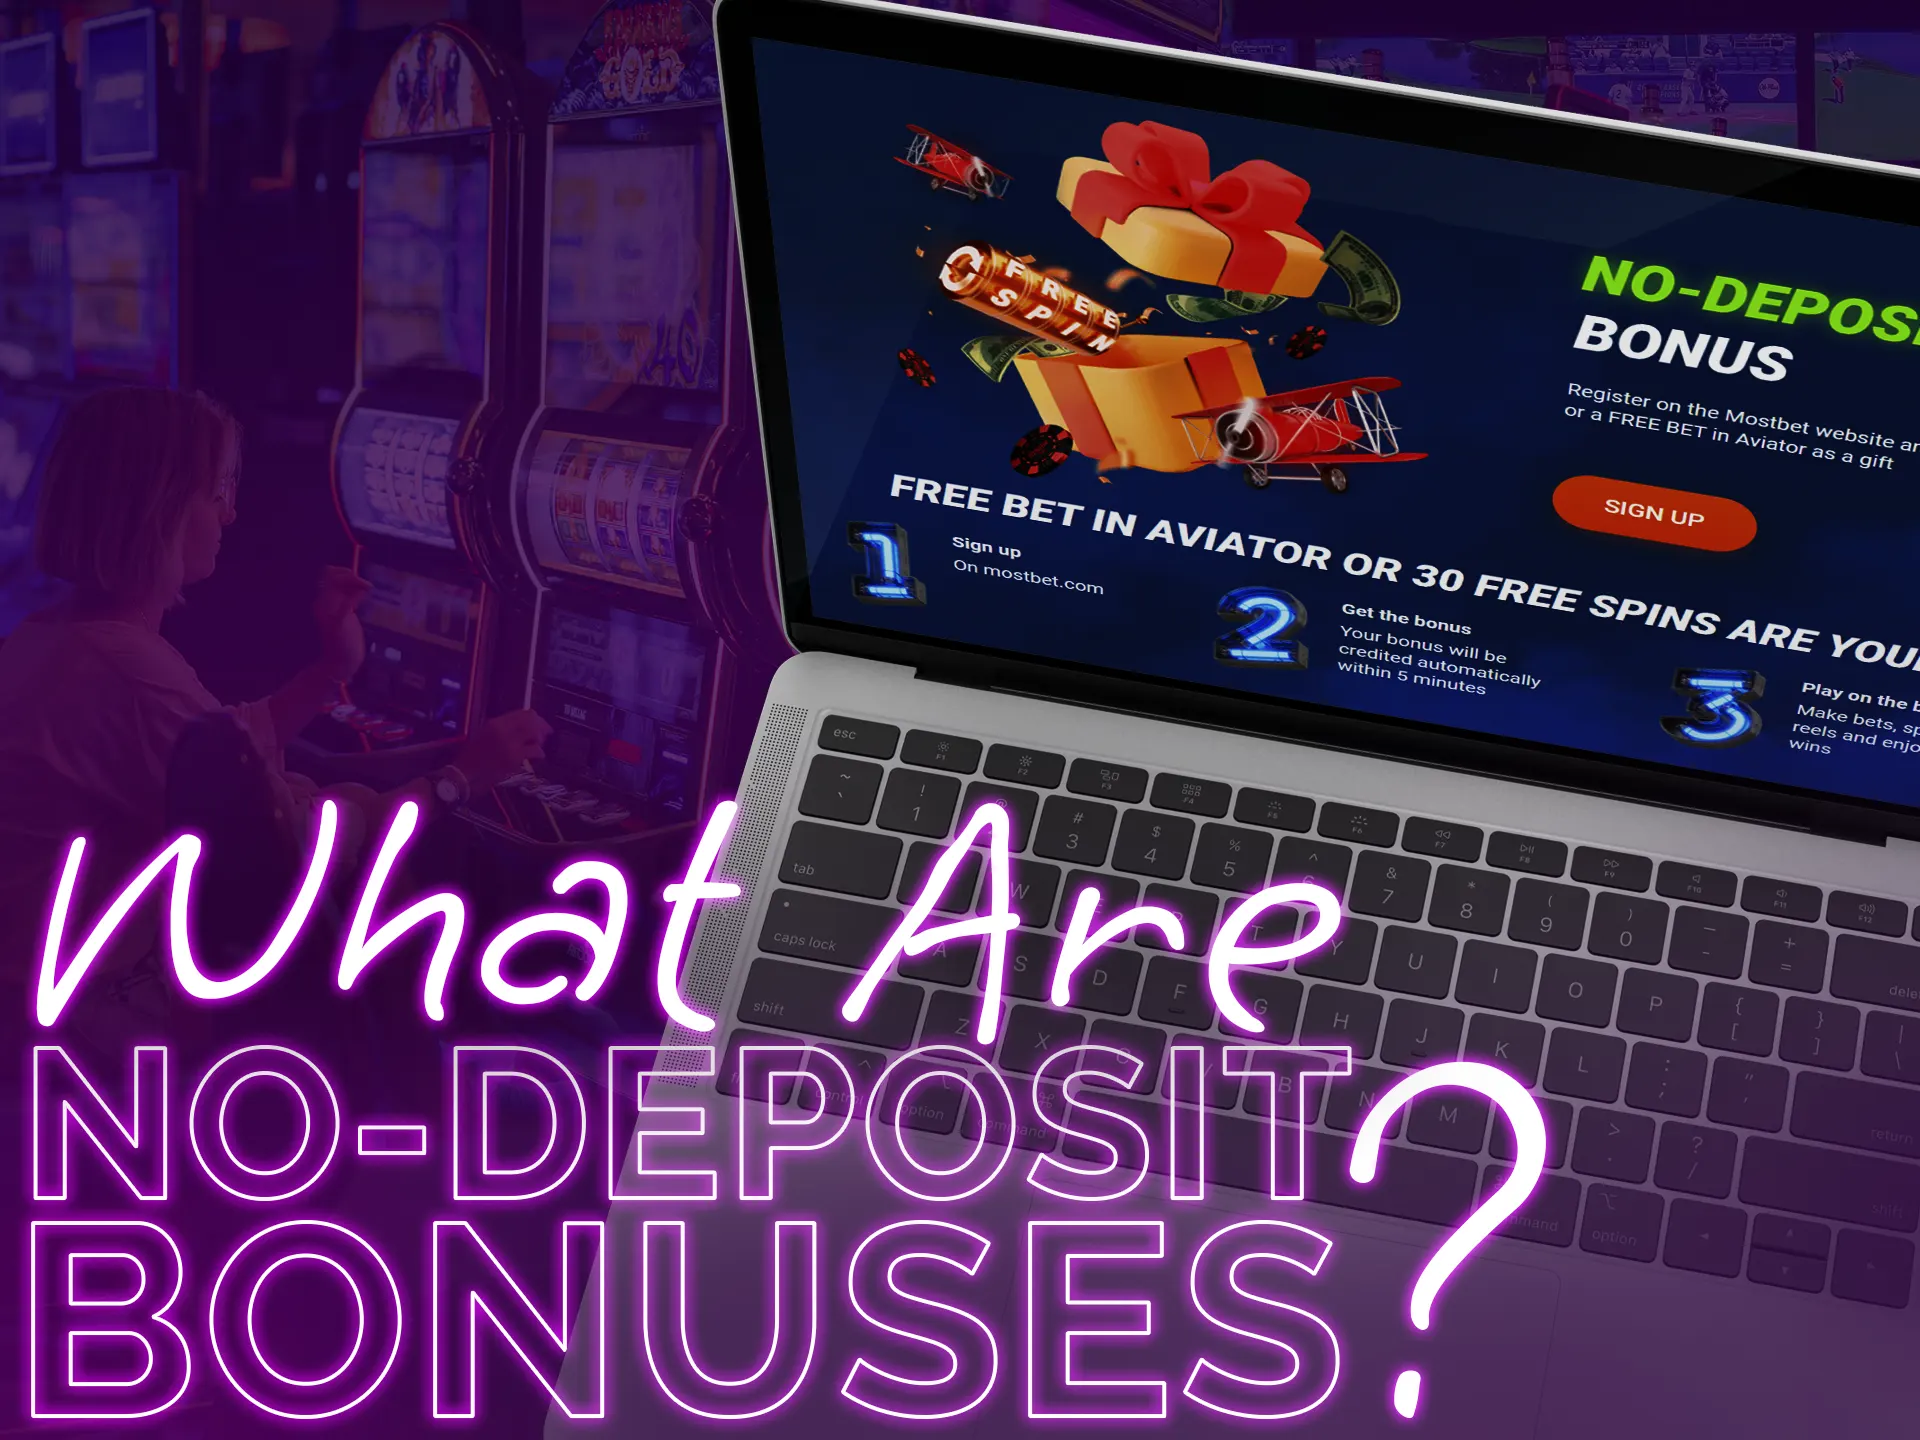 Learn what no-deposit bonuses are.